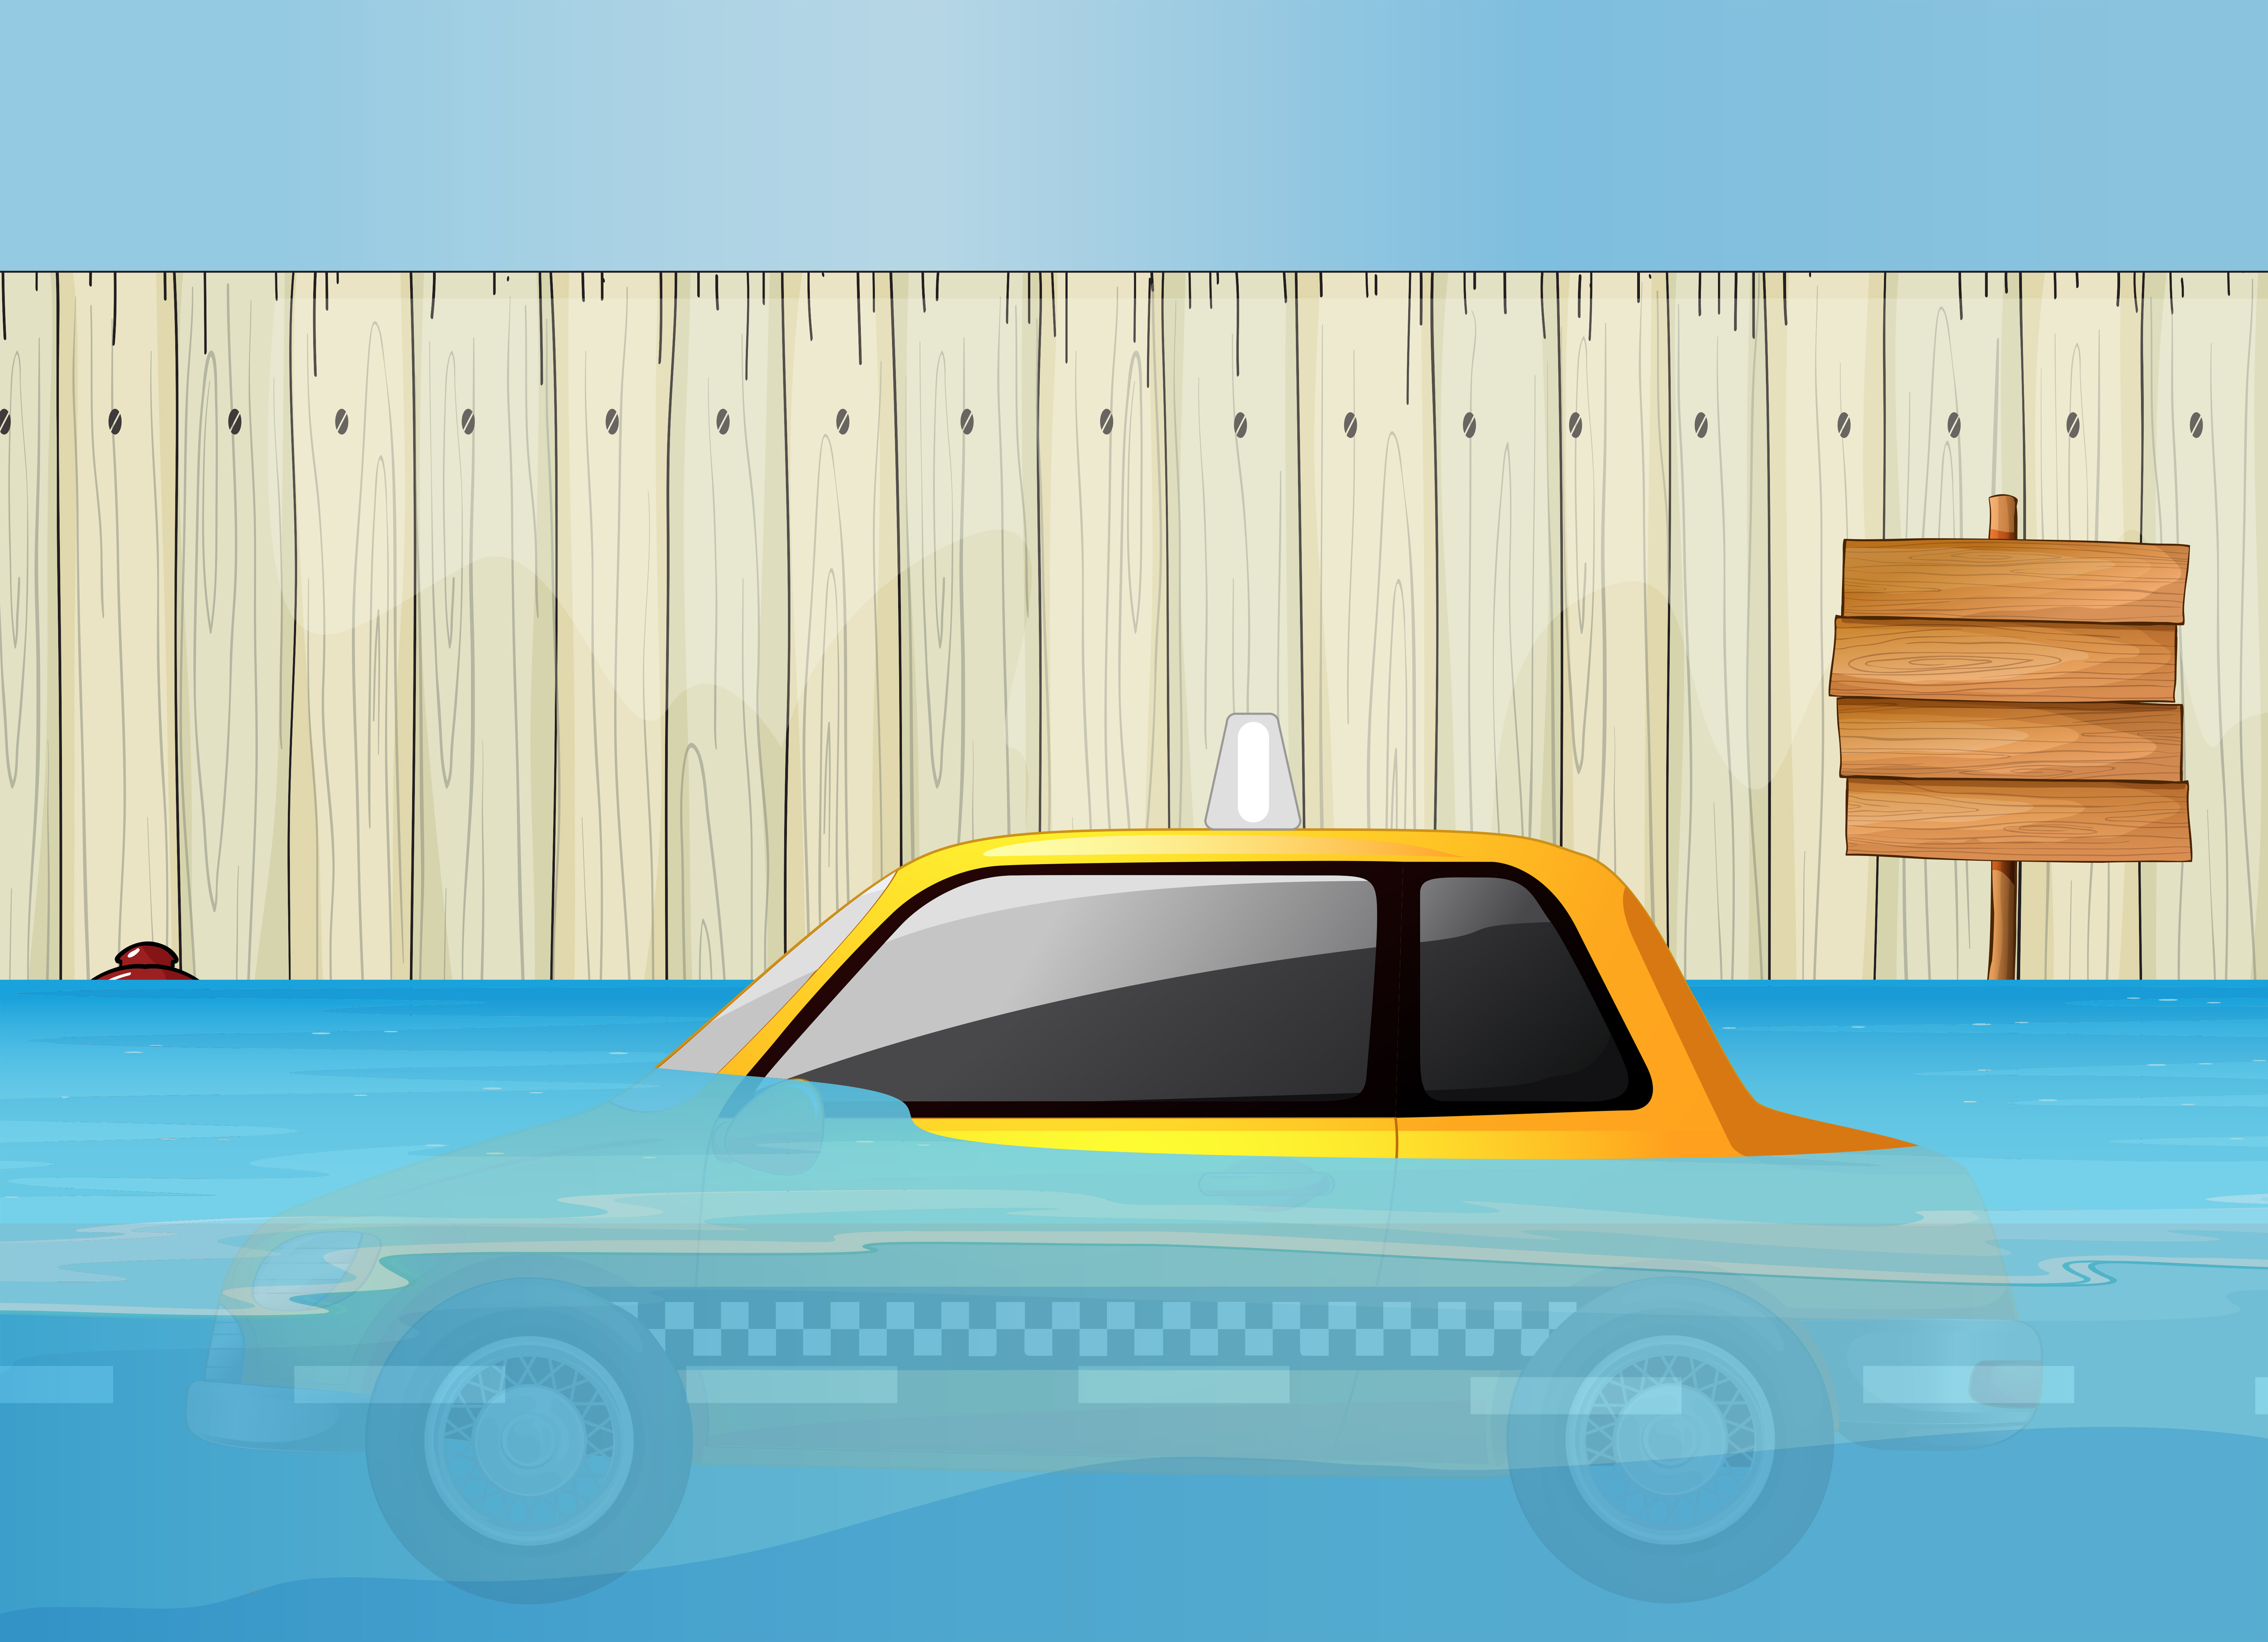 A taxi in flash flood 432506 - Download Free Vectors ...